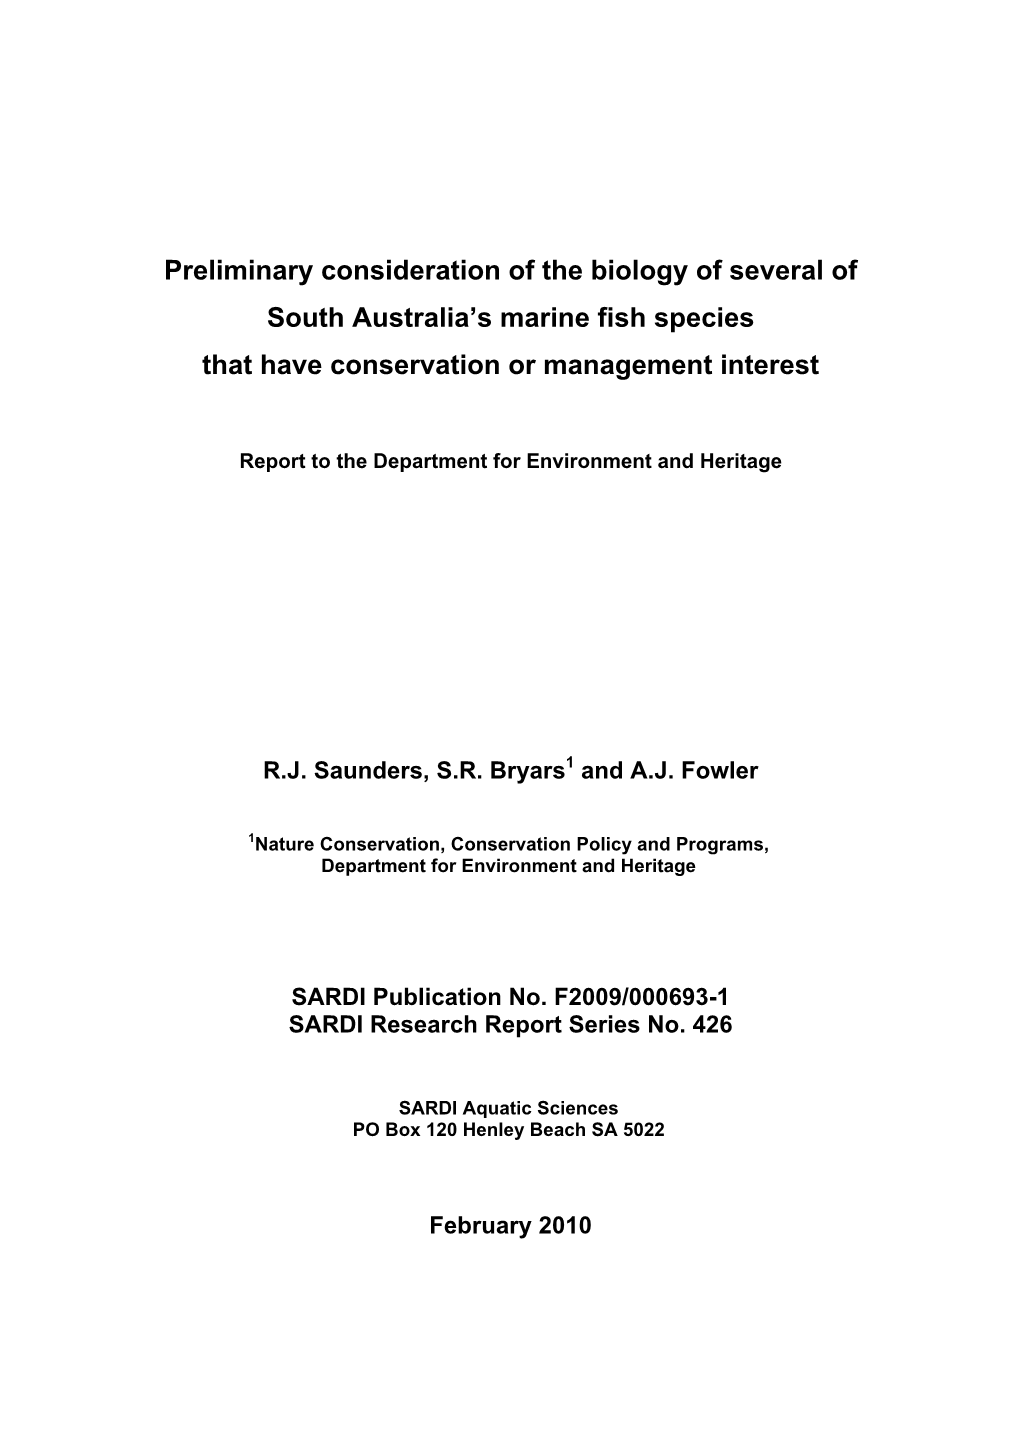 Preliminary Consideration of the Biology of Several of South Australia’S Marine Fish Species That Have Conservation Or Management Interest